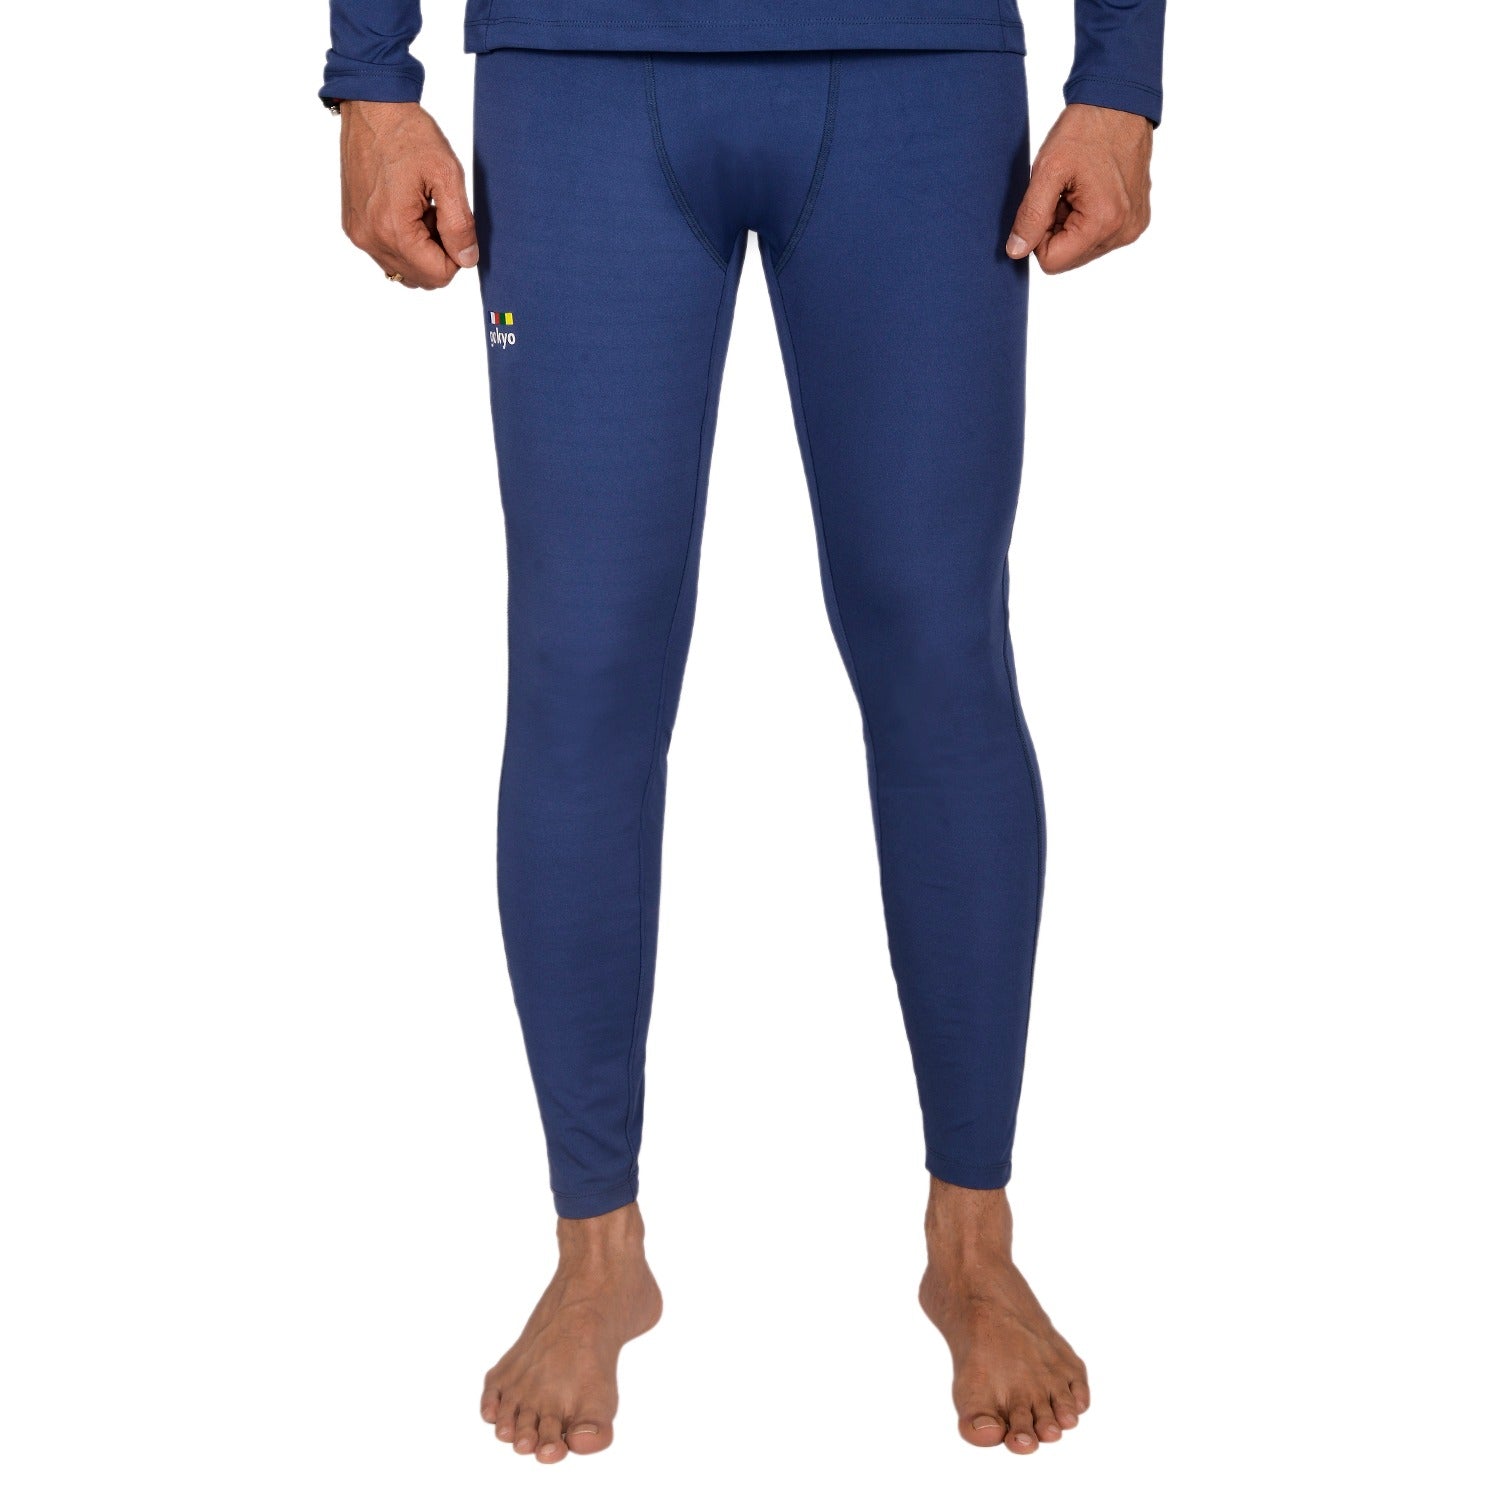 Buy K2 Base Layer Thermals Bottoms Blue at Gokyo Outdoor Clothing & Gear